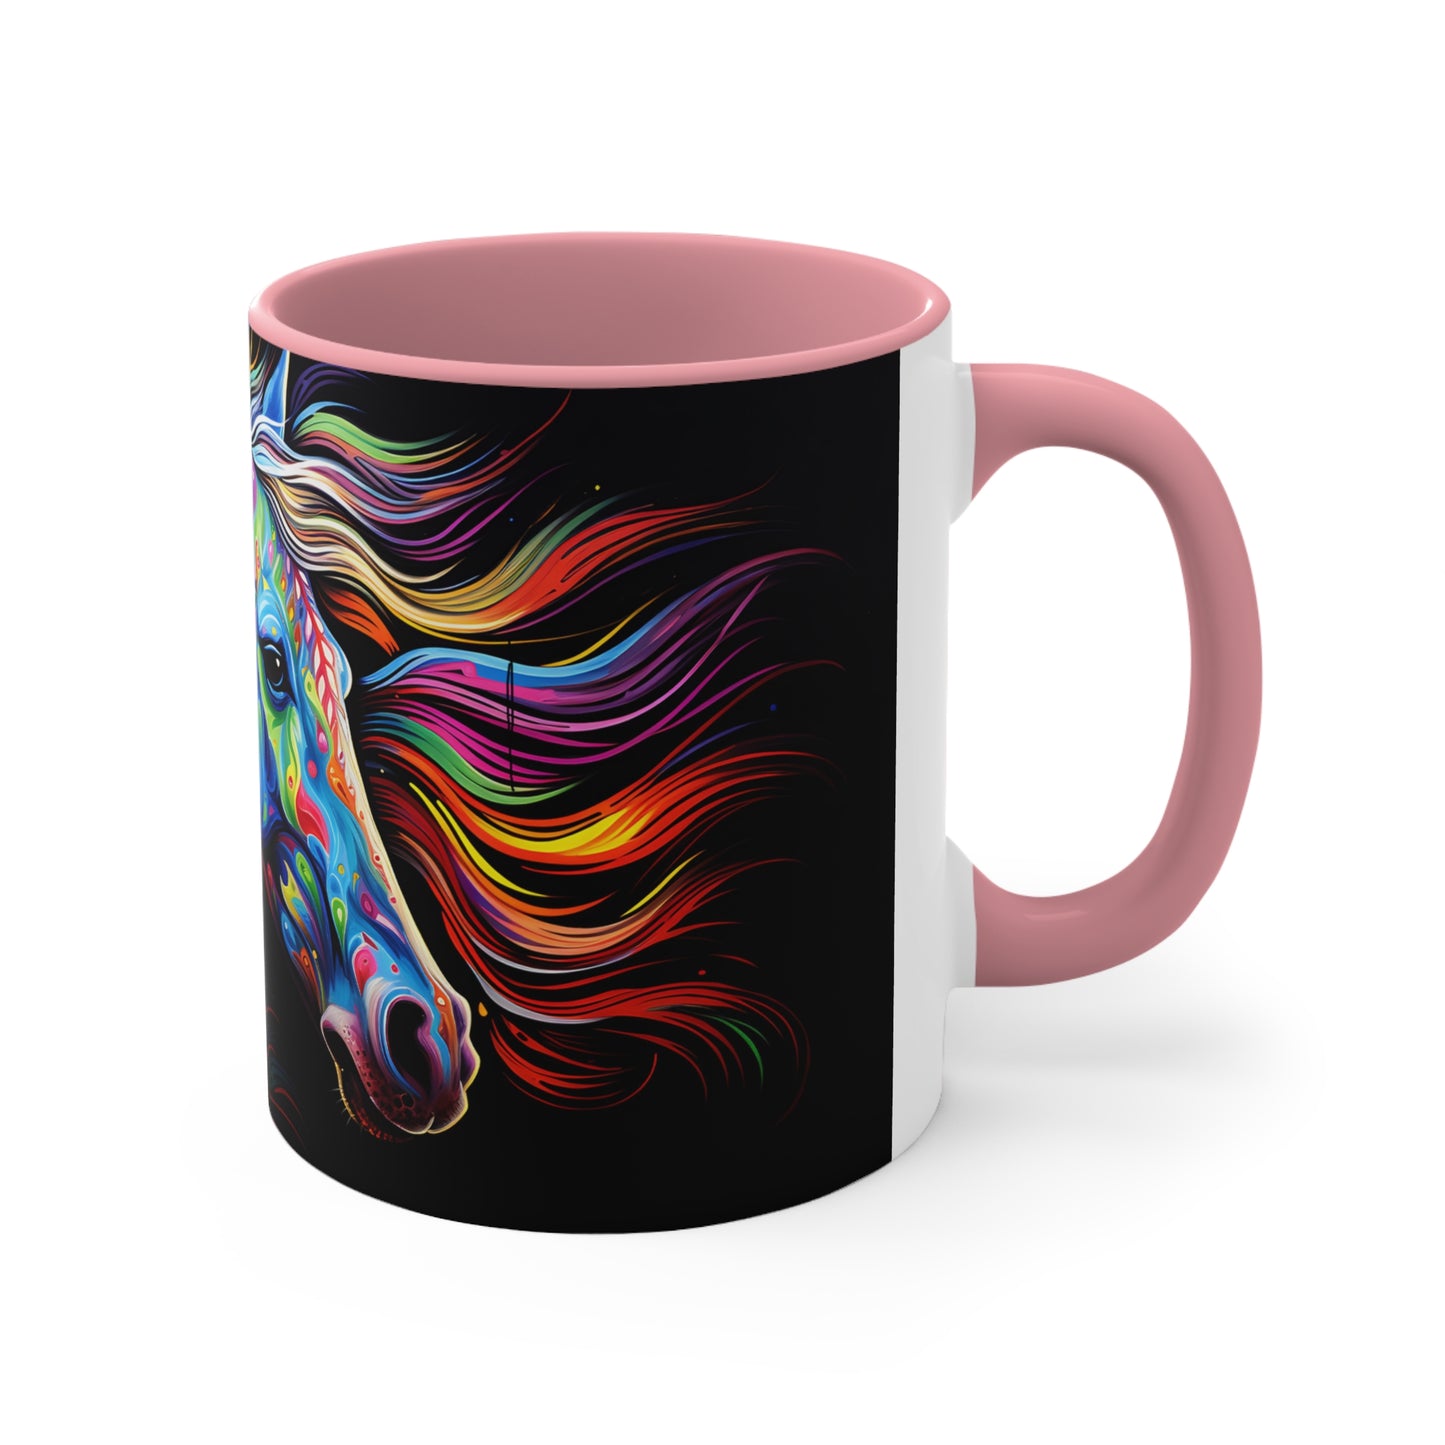 KALEIDOSCOPE HORSE MUG - Available in Red, Blue, Navy, Black and Pink - MUGSCITY - Free Shipping